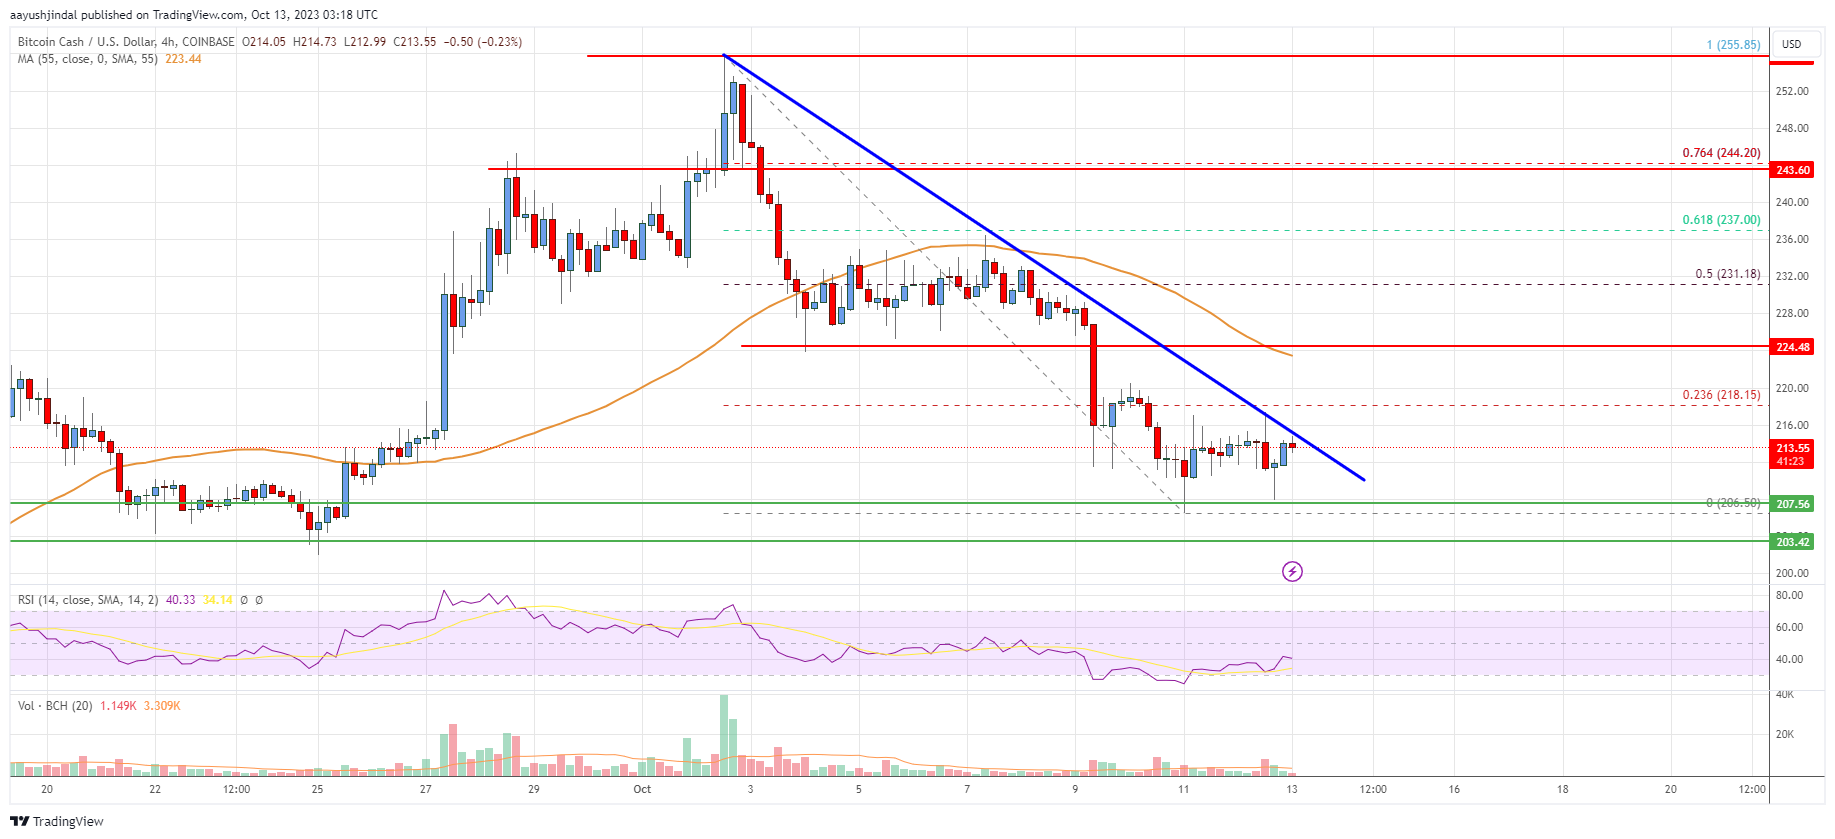 Bitcoin Cash Analysis: Bulls Protect Key Support But Upsides Limited